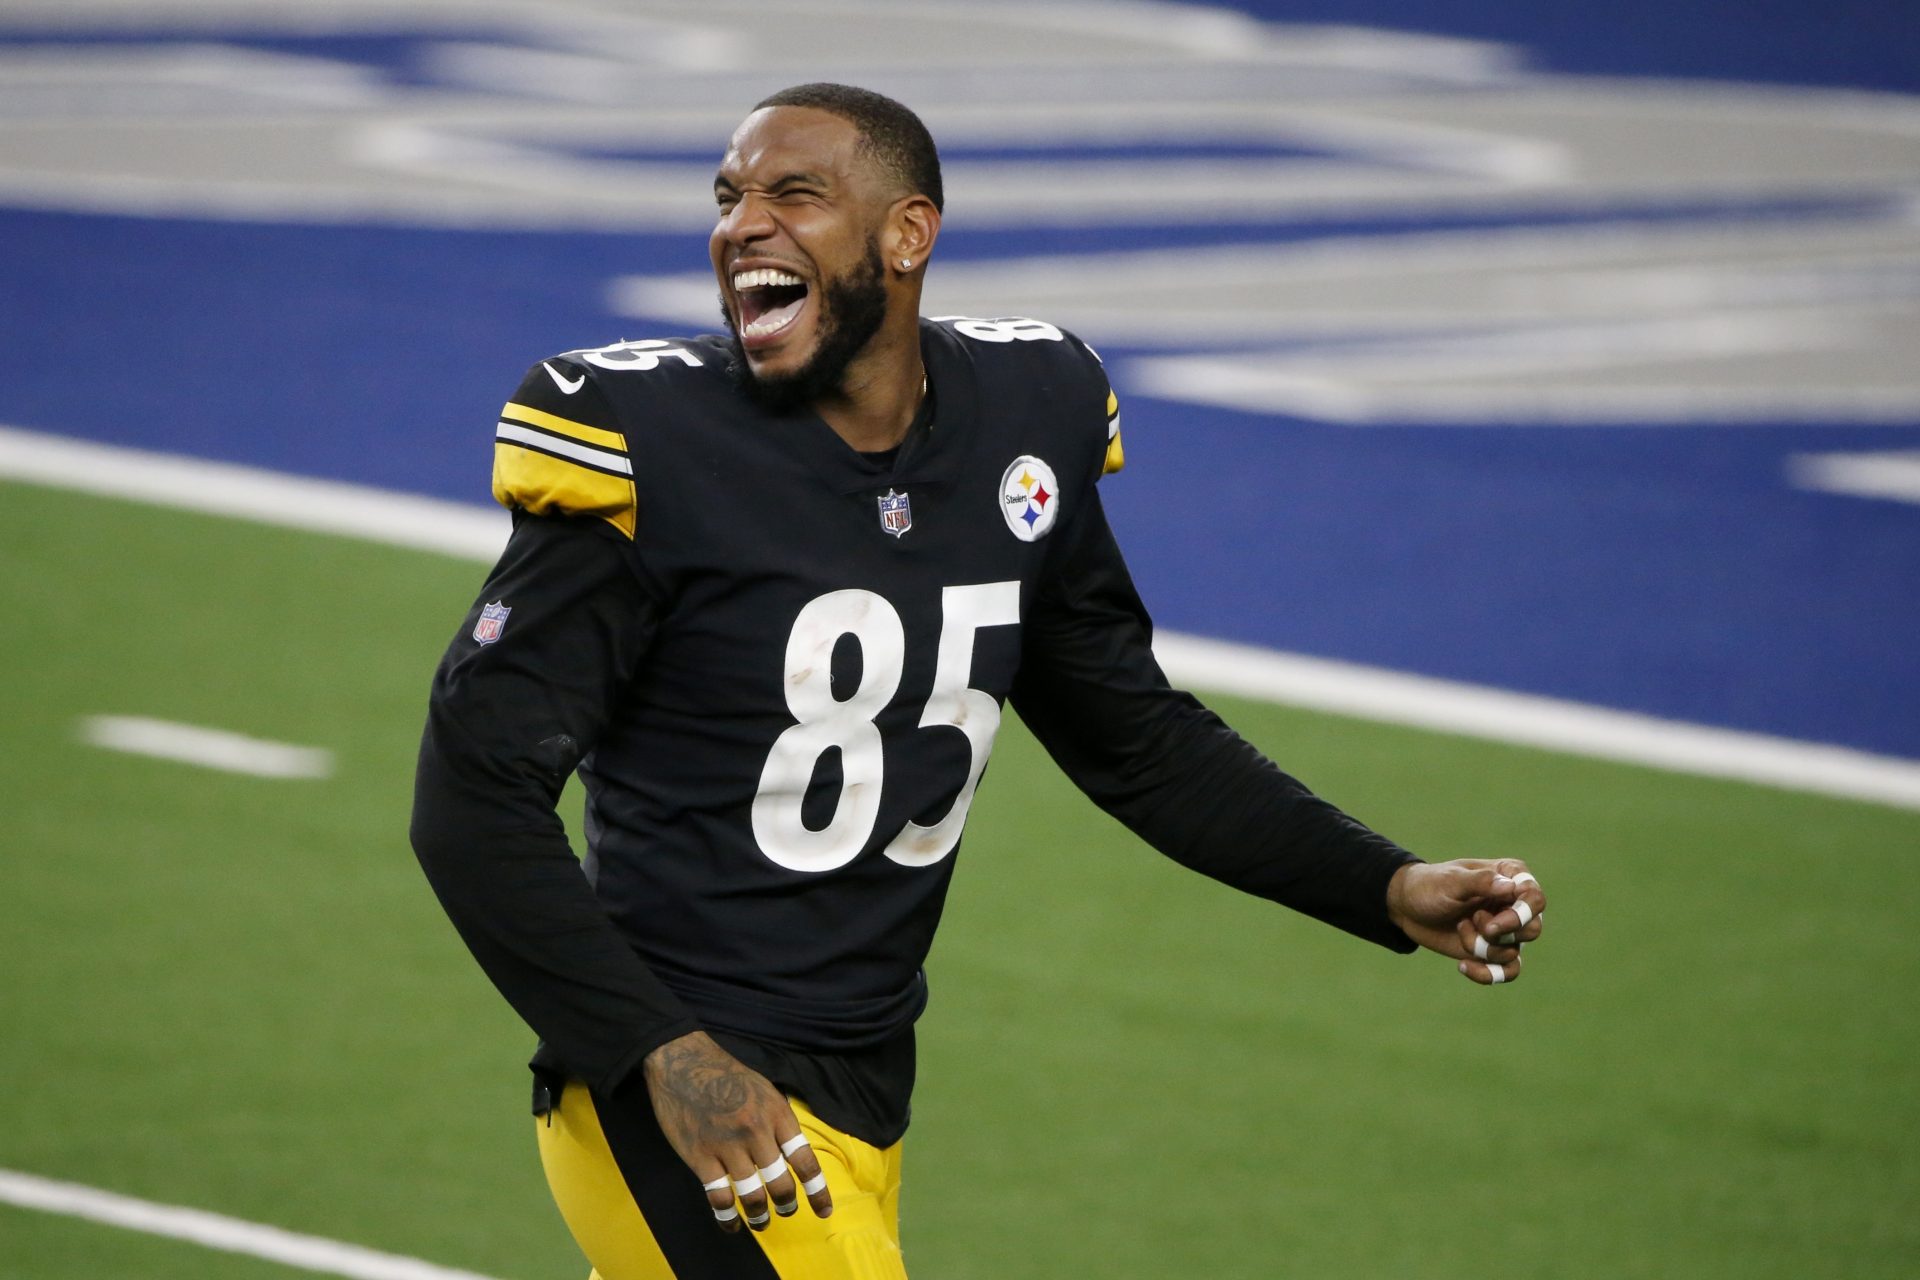 Pittsburgh Steelers' Eric Ebron celebrates after their 24-19 win against the Dallas Cowboys in an NFL football game in Arlington, Texas, Sunday, Nov. 8, 2020.